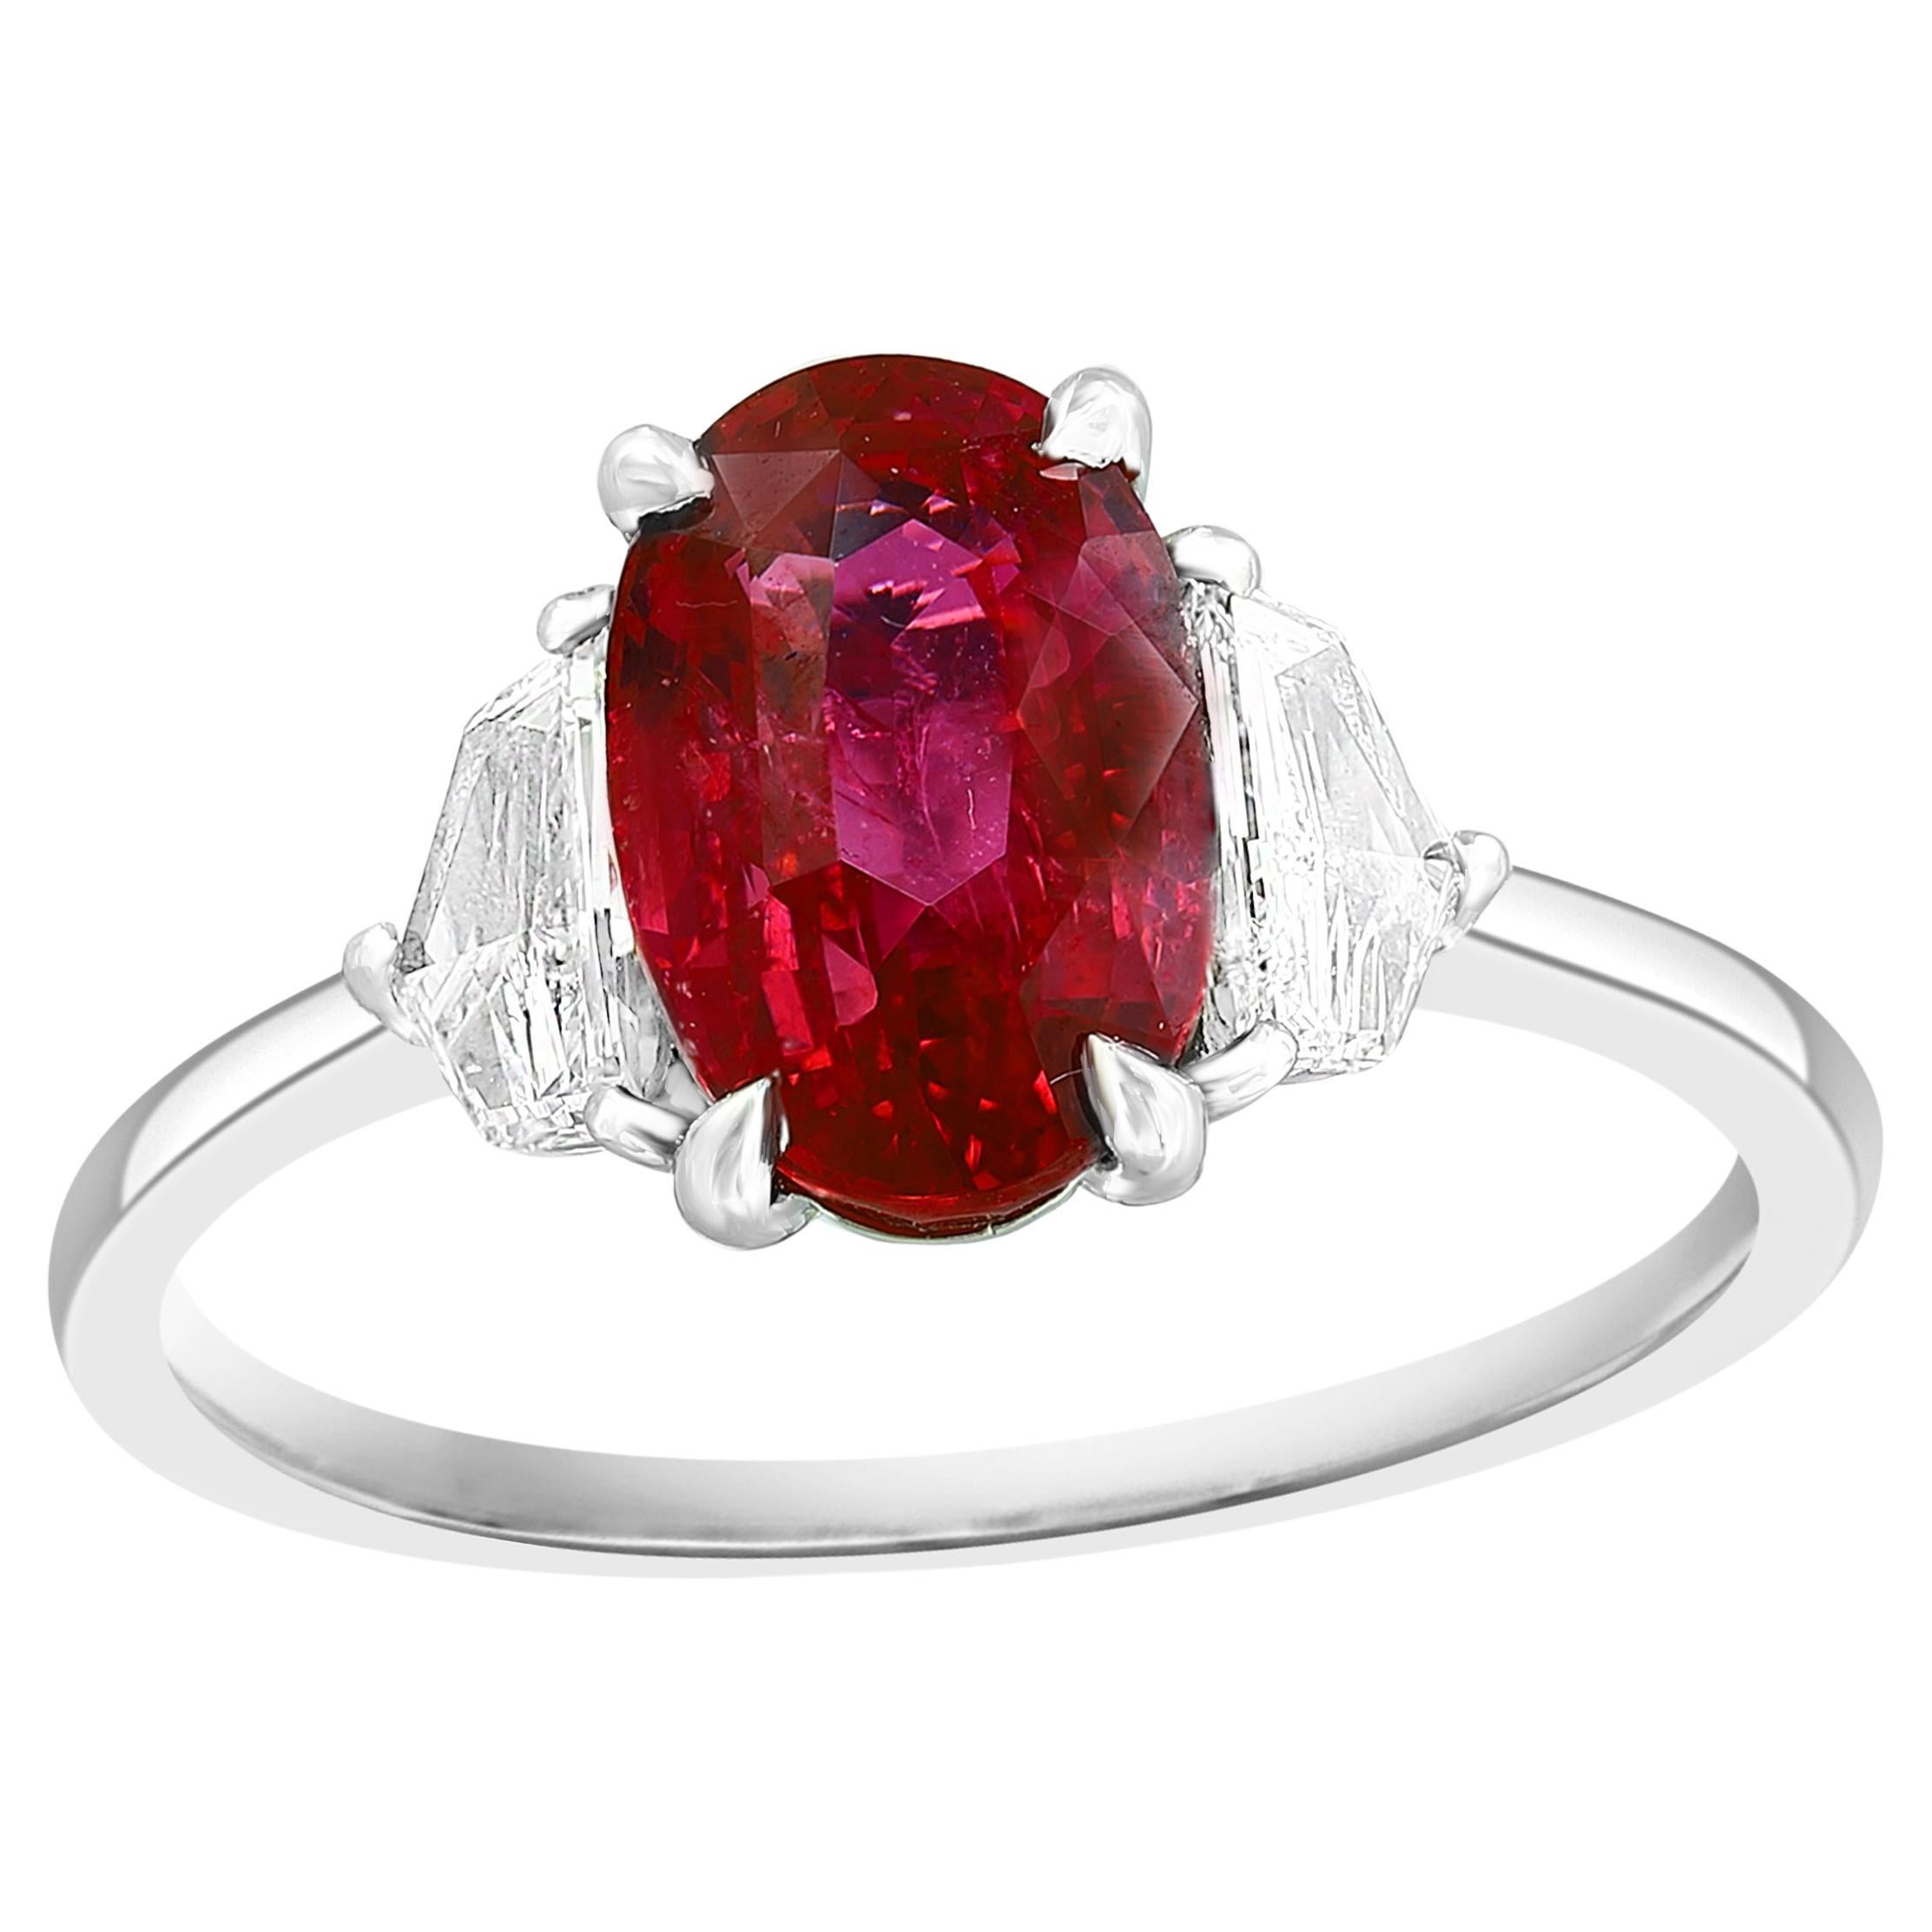 Certified 3.06 Carat Oval Cut Ruby and Diamond Engagement Ring in Platinum